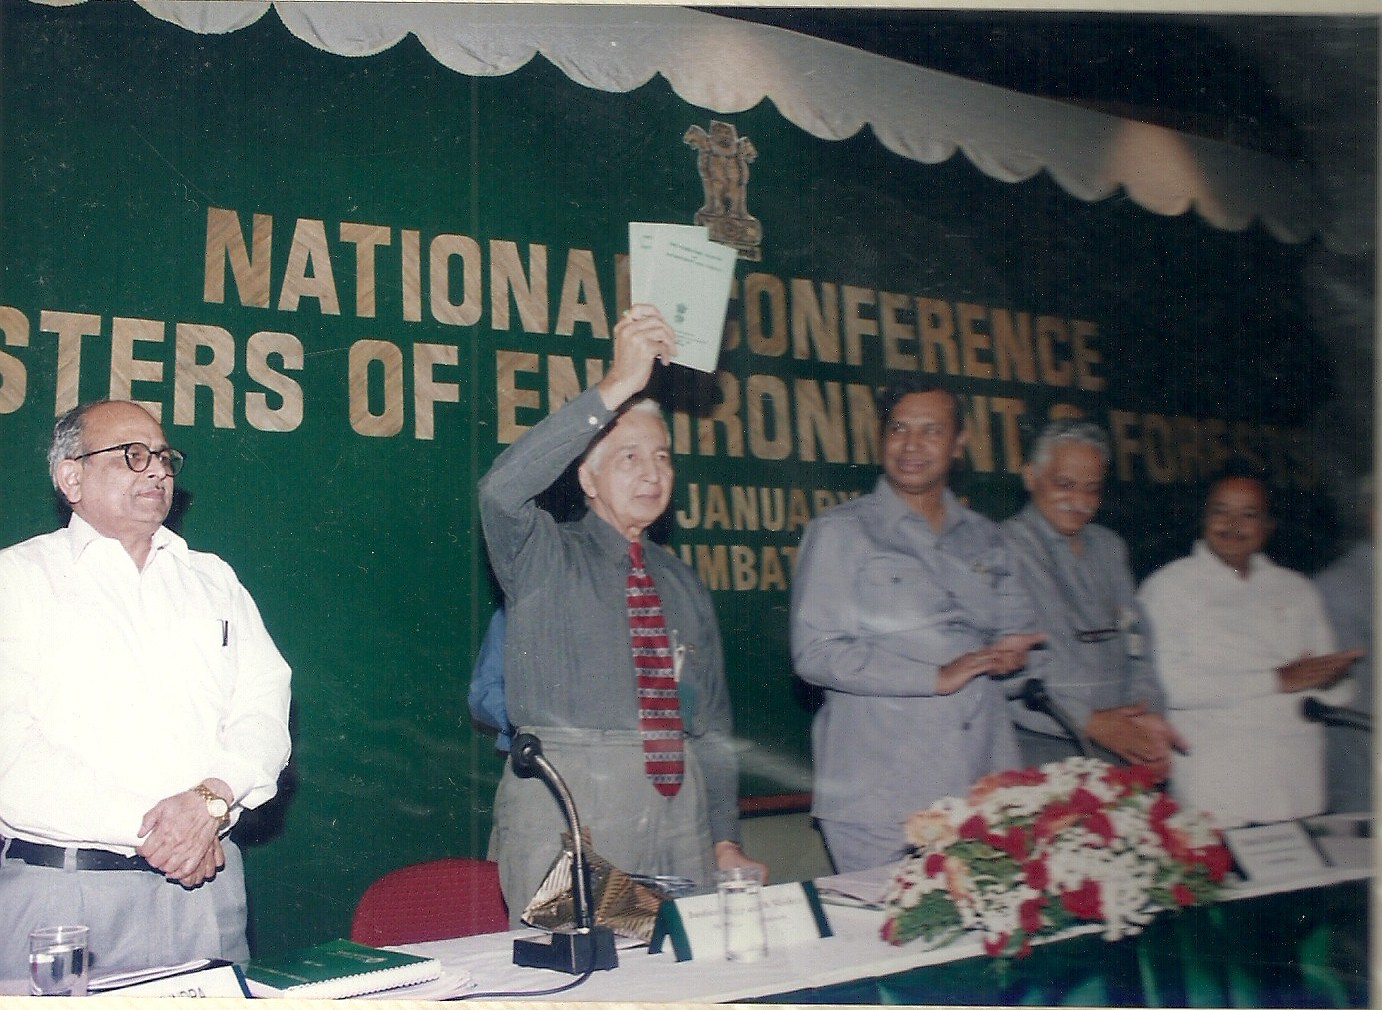 Another view of Env. Ministers Conference at Coimbtore - Jan 2001